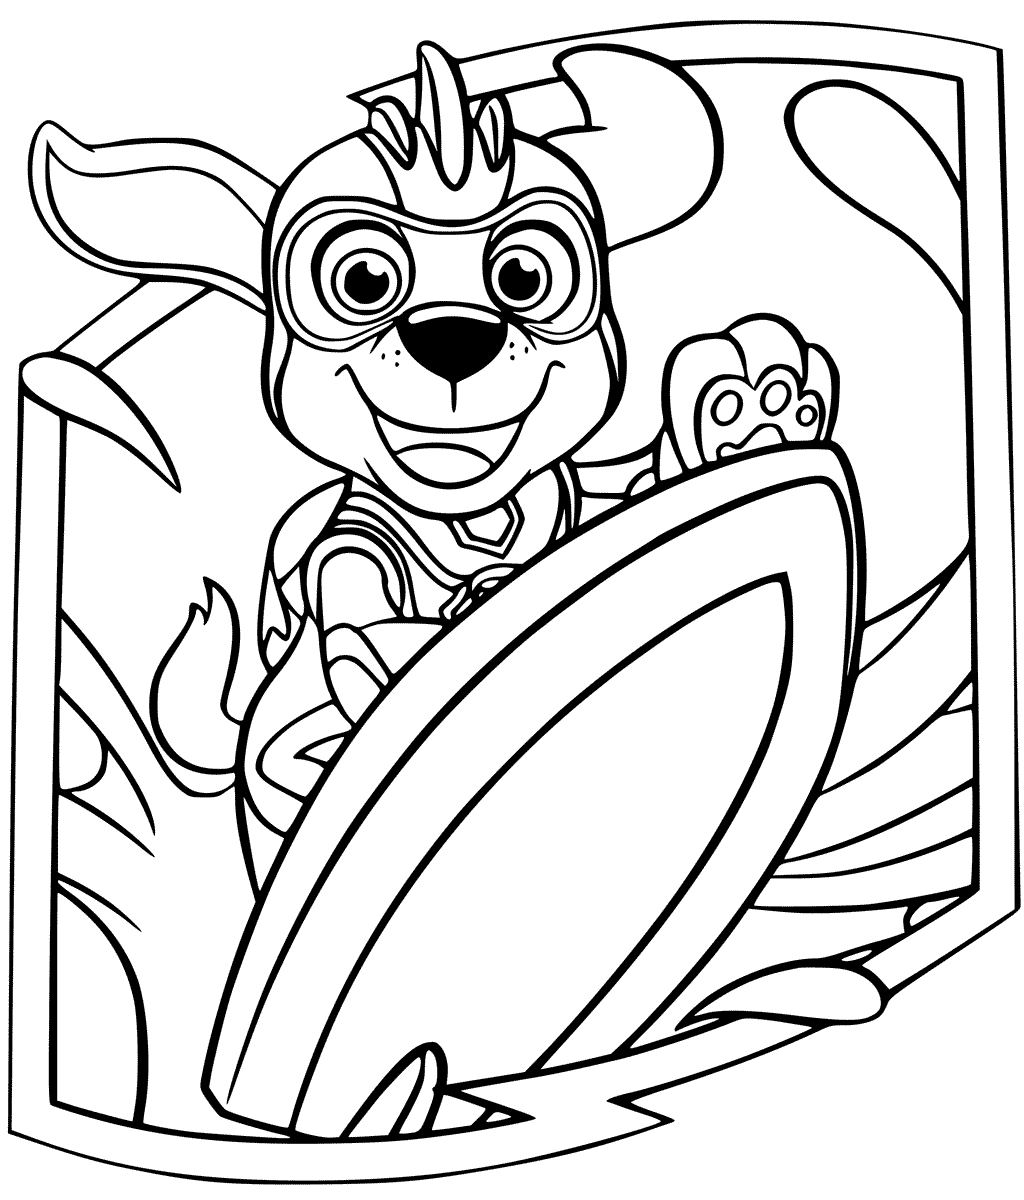 10 Free Paw Patrol Mighty Pups Coloring Pages Printable pour Zuma Pat Patrouille Dessin